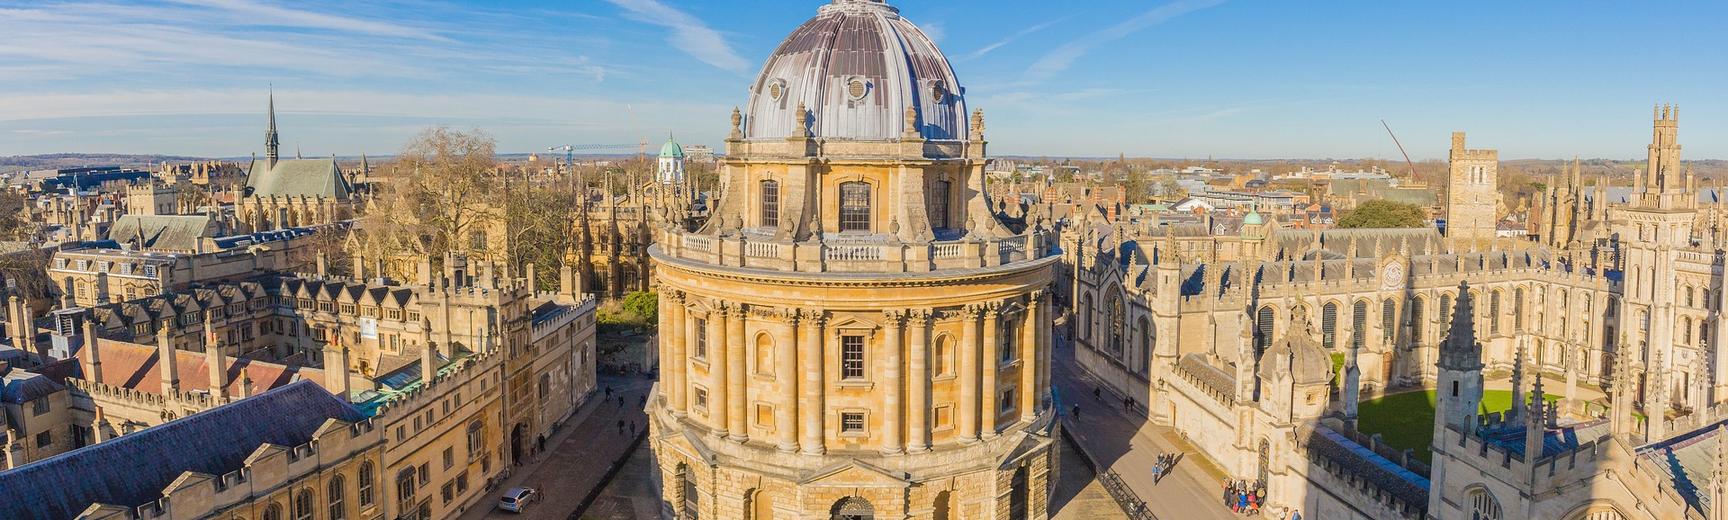 View of the Radcliffe Camera in Oxford